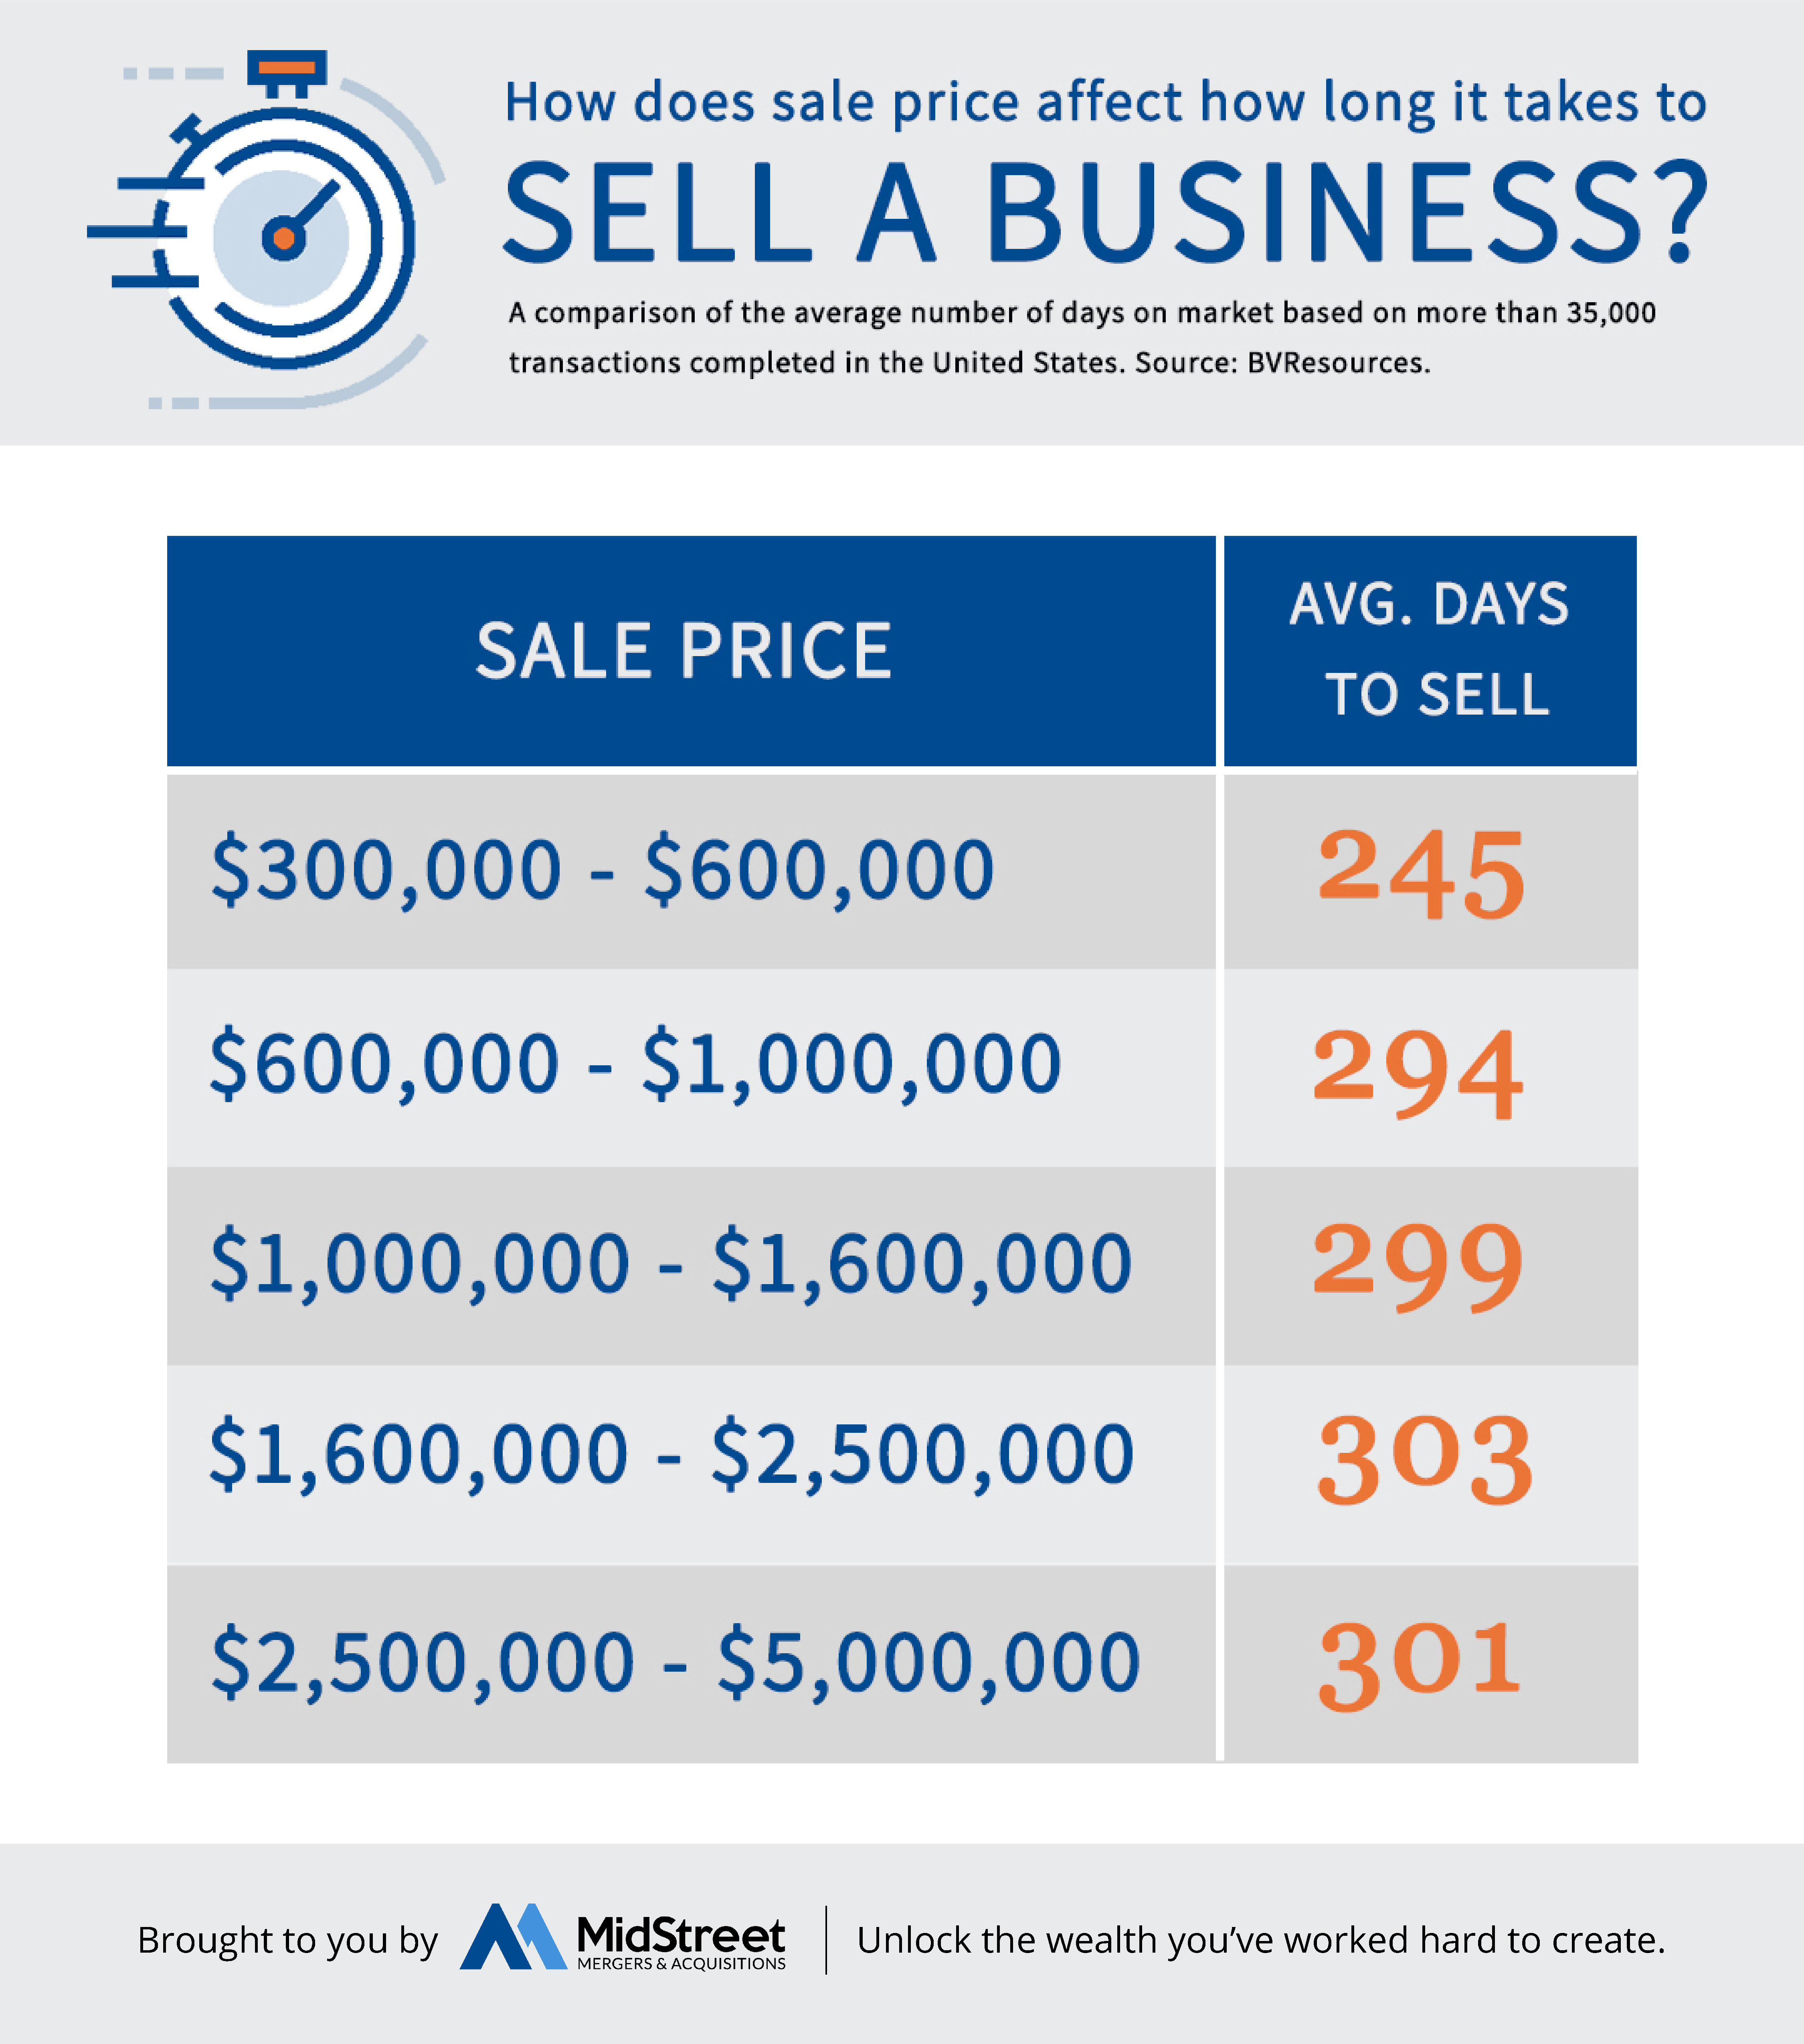 How Long Does it Take to Sell a Business?